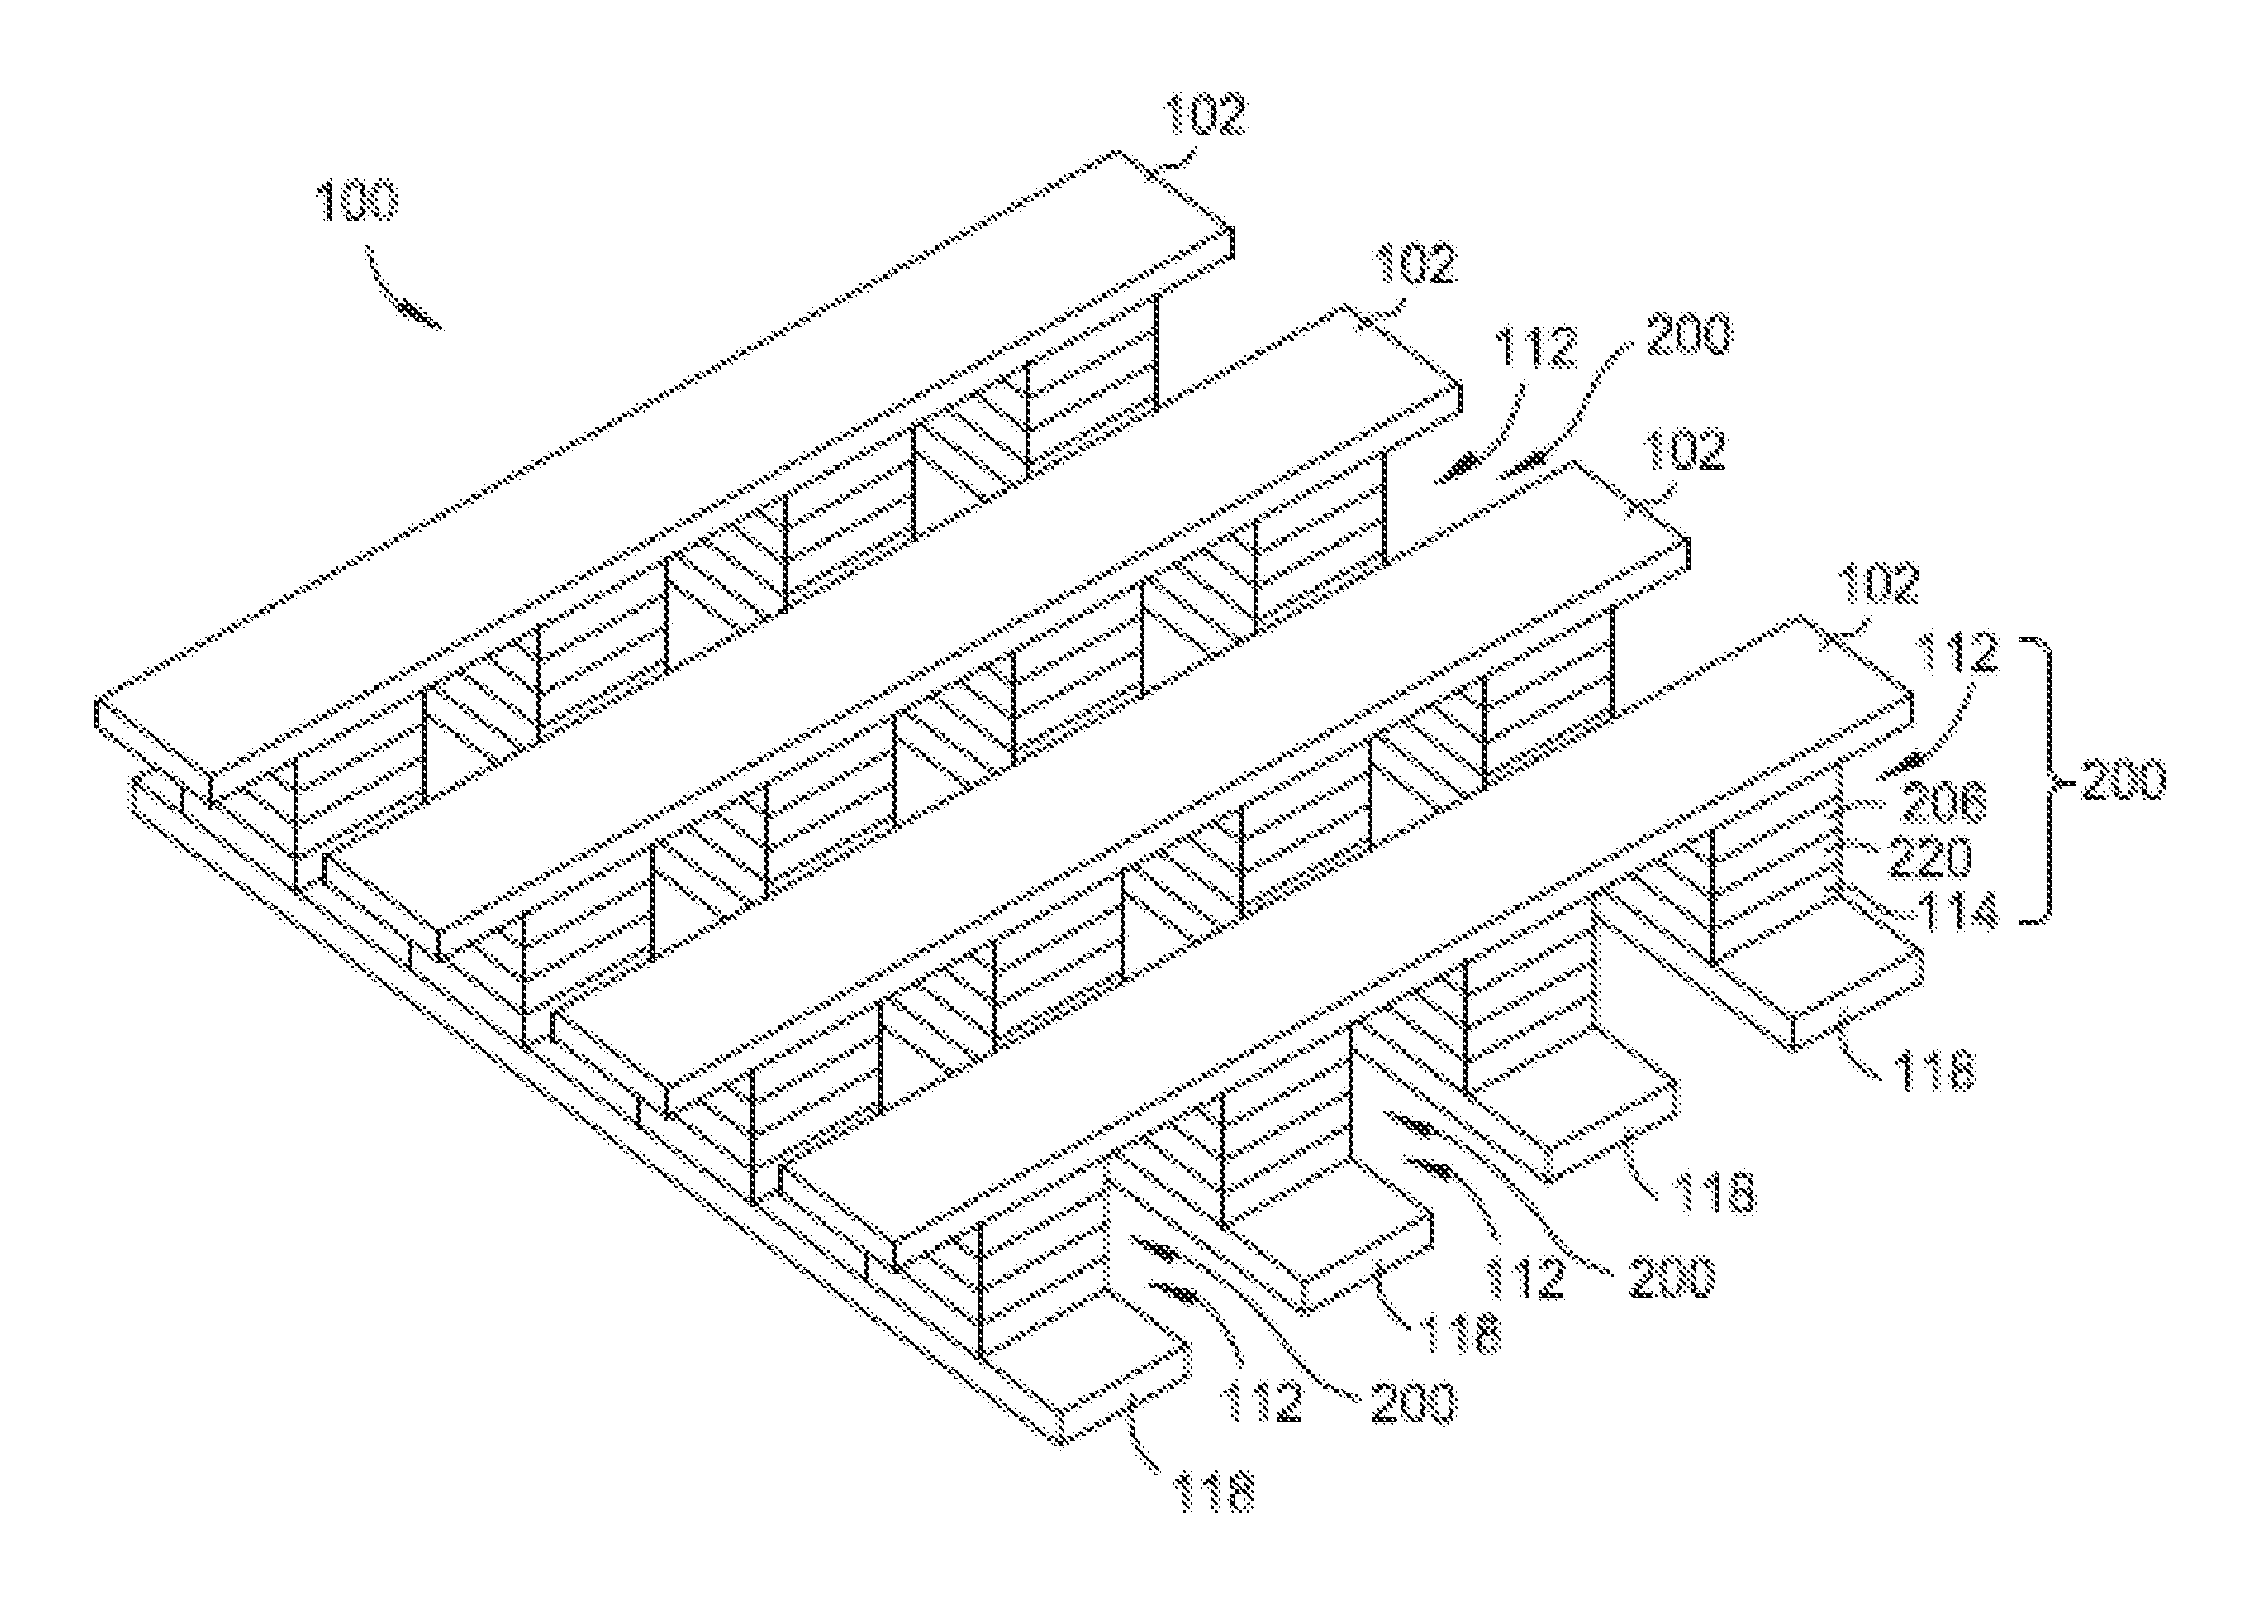 Memory Cell Having an Integrated Two-Terminal Current Limiting Resistor